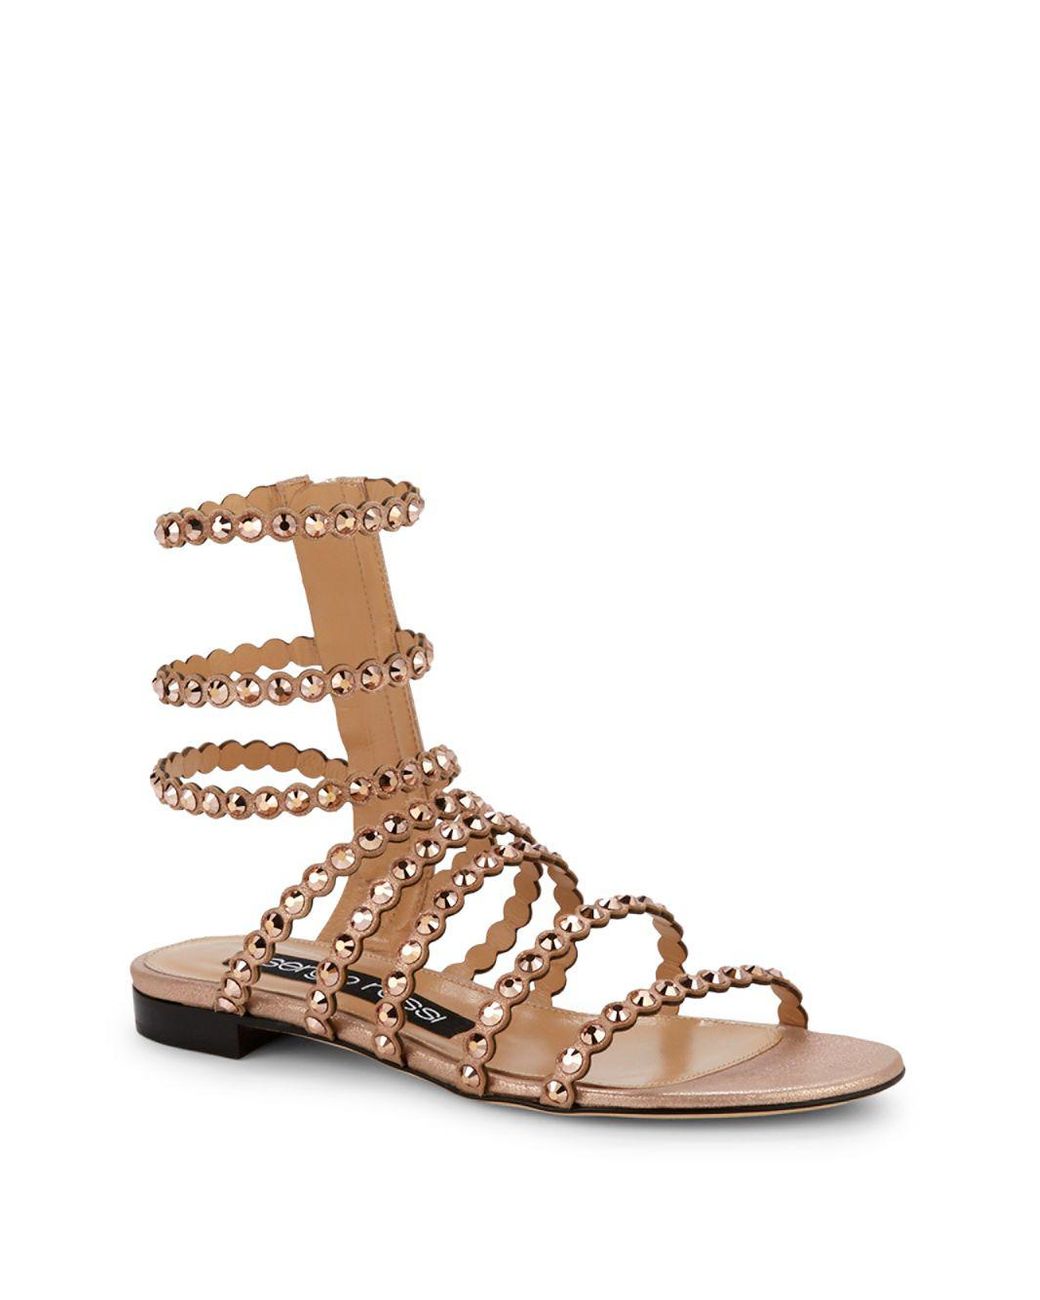 Sergio Rossi Kimberly Suede & Jewel Gladiator Sandals - Save 10% - Lyst